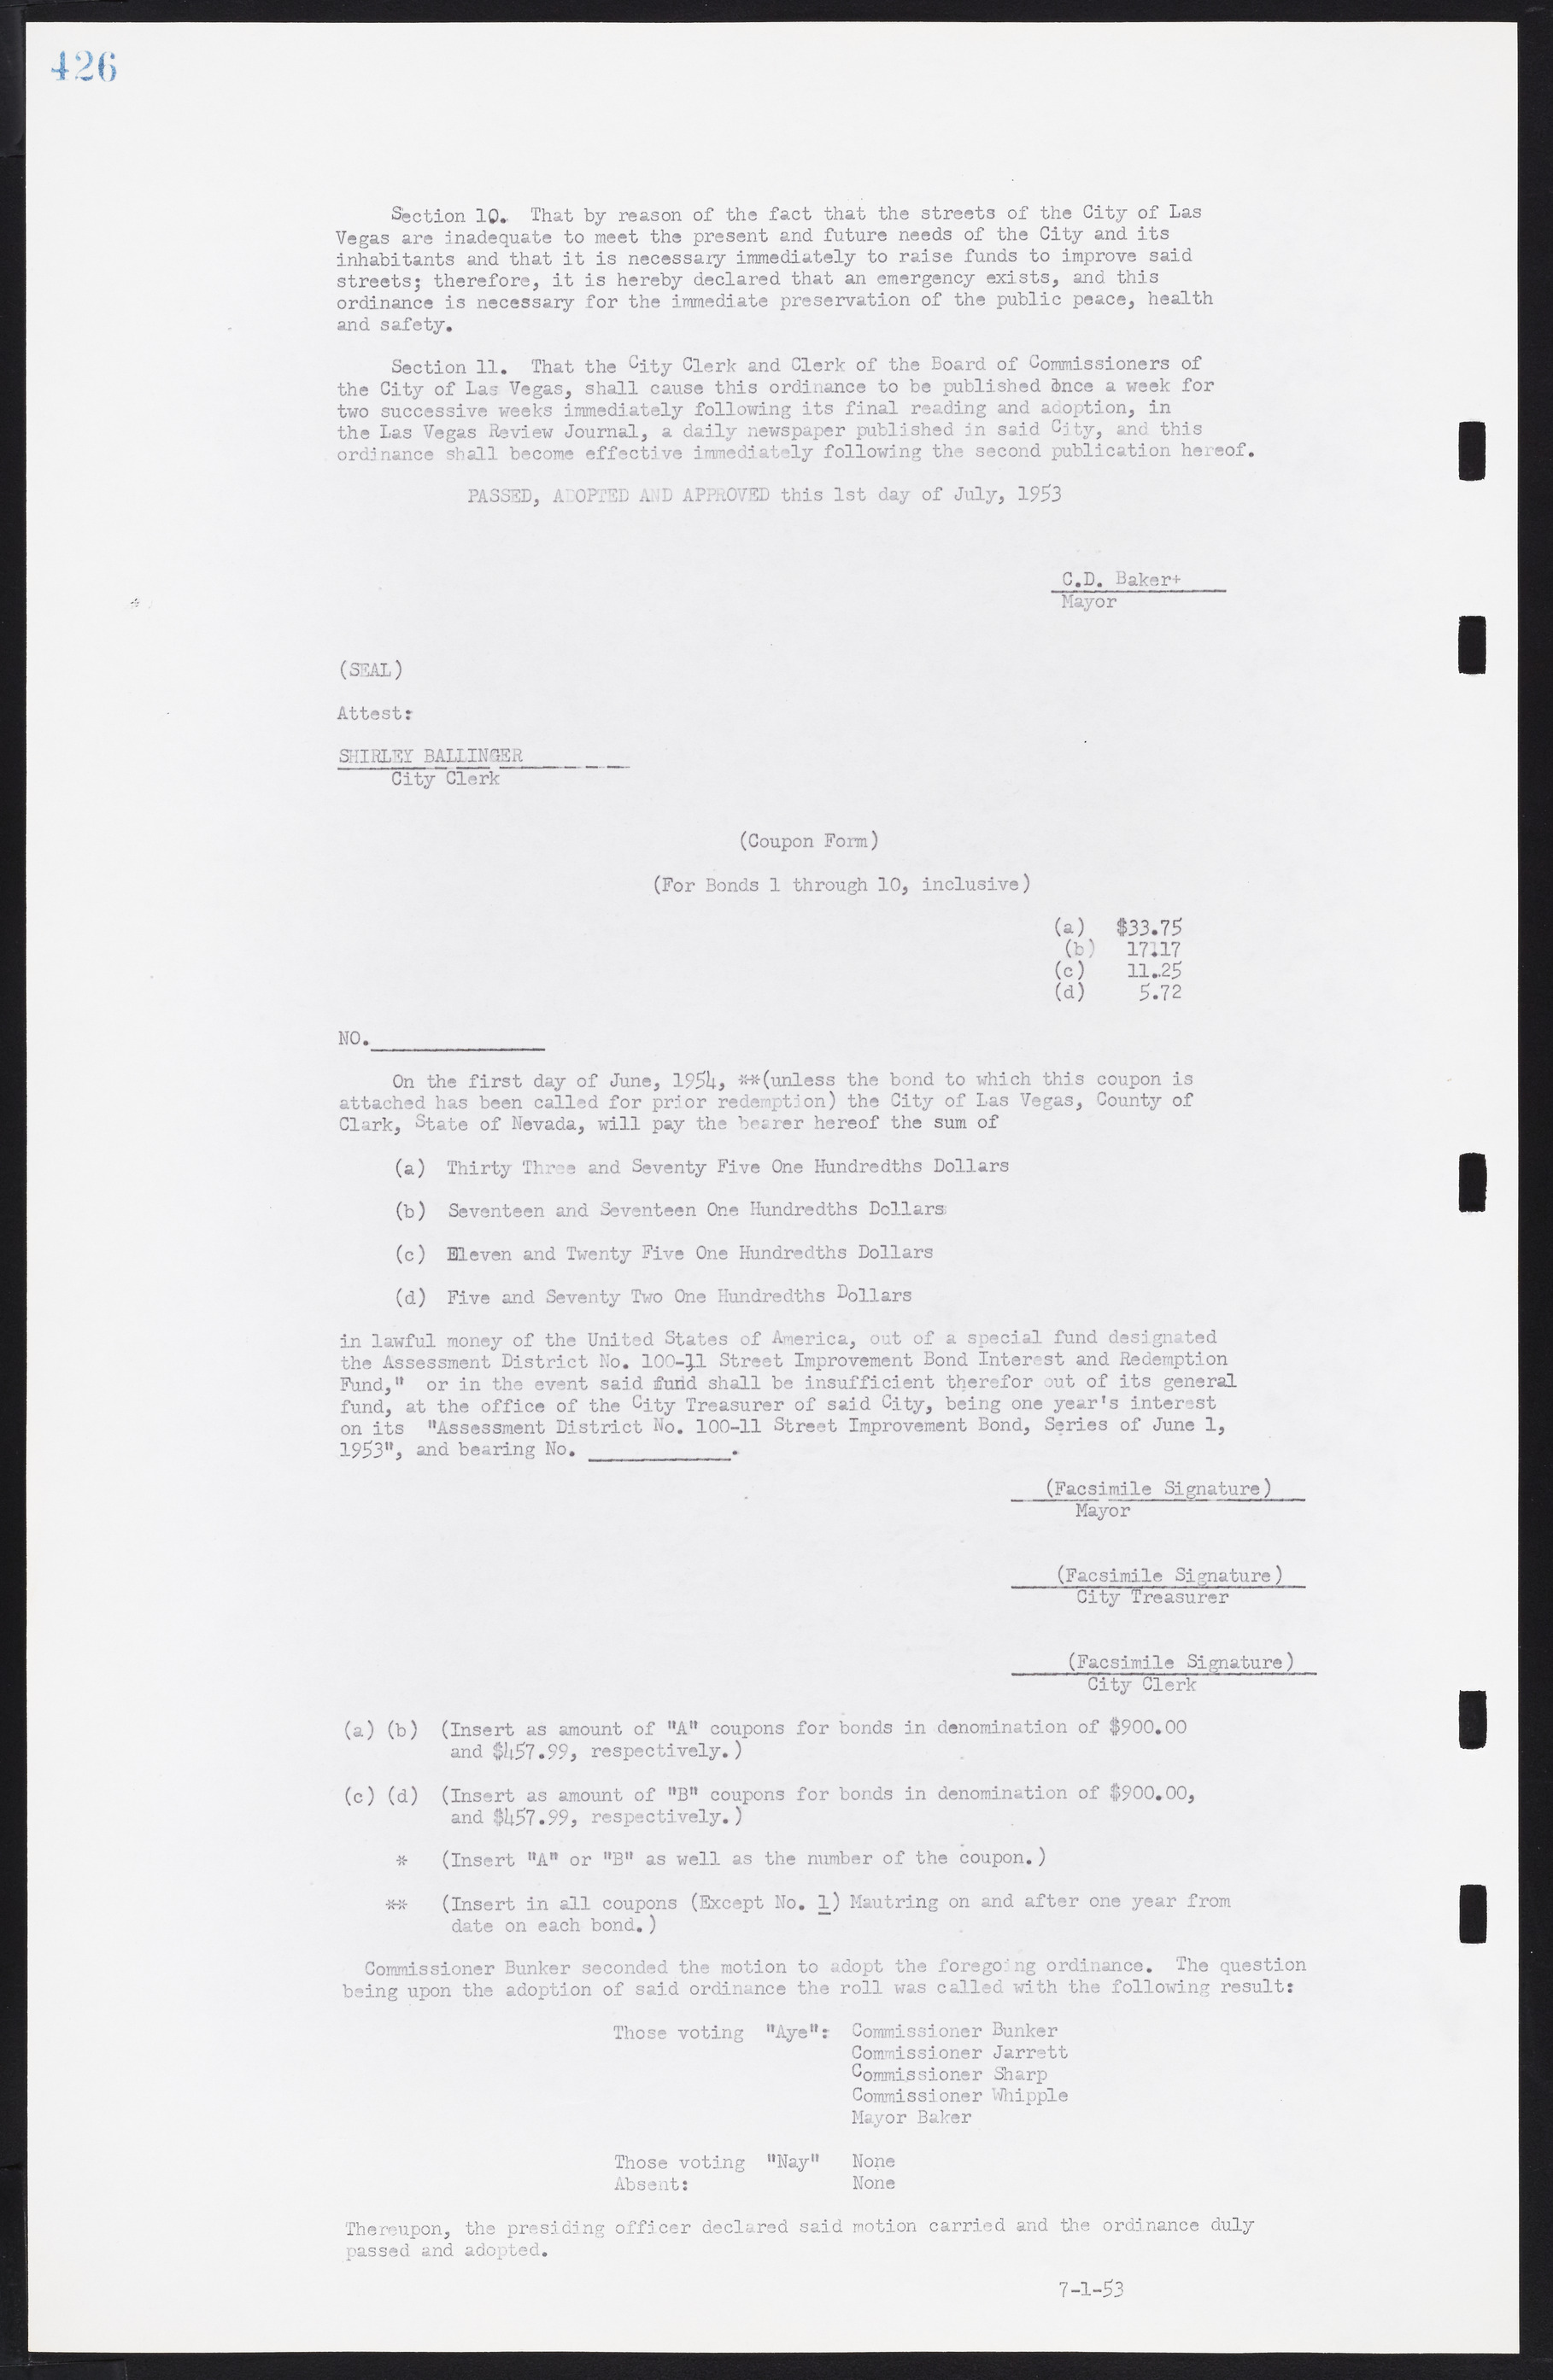 Las Vegas City Commission Minutes, May 26, 1952 to February 17, 1954, lvc000008-456